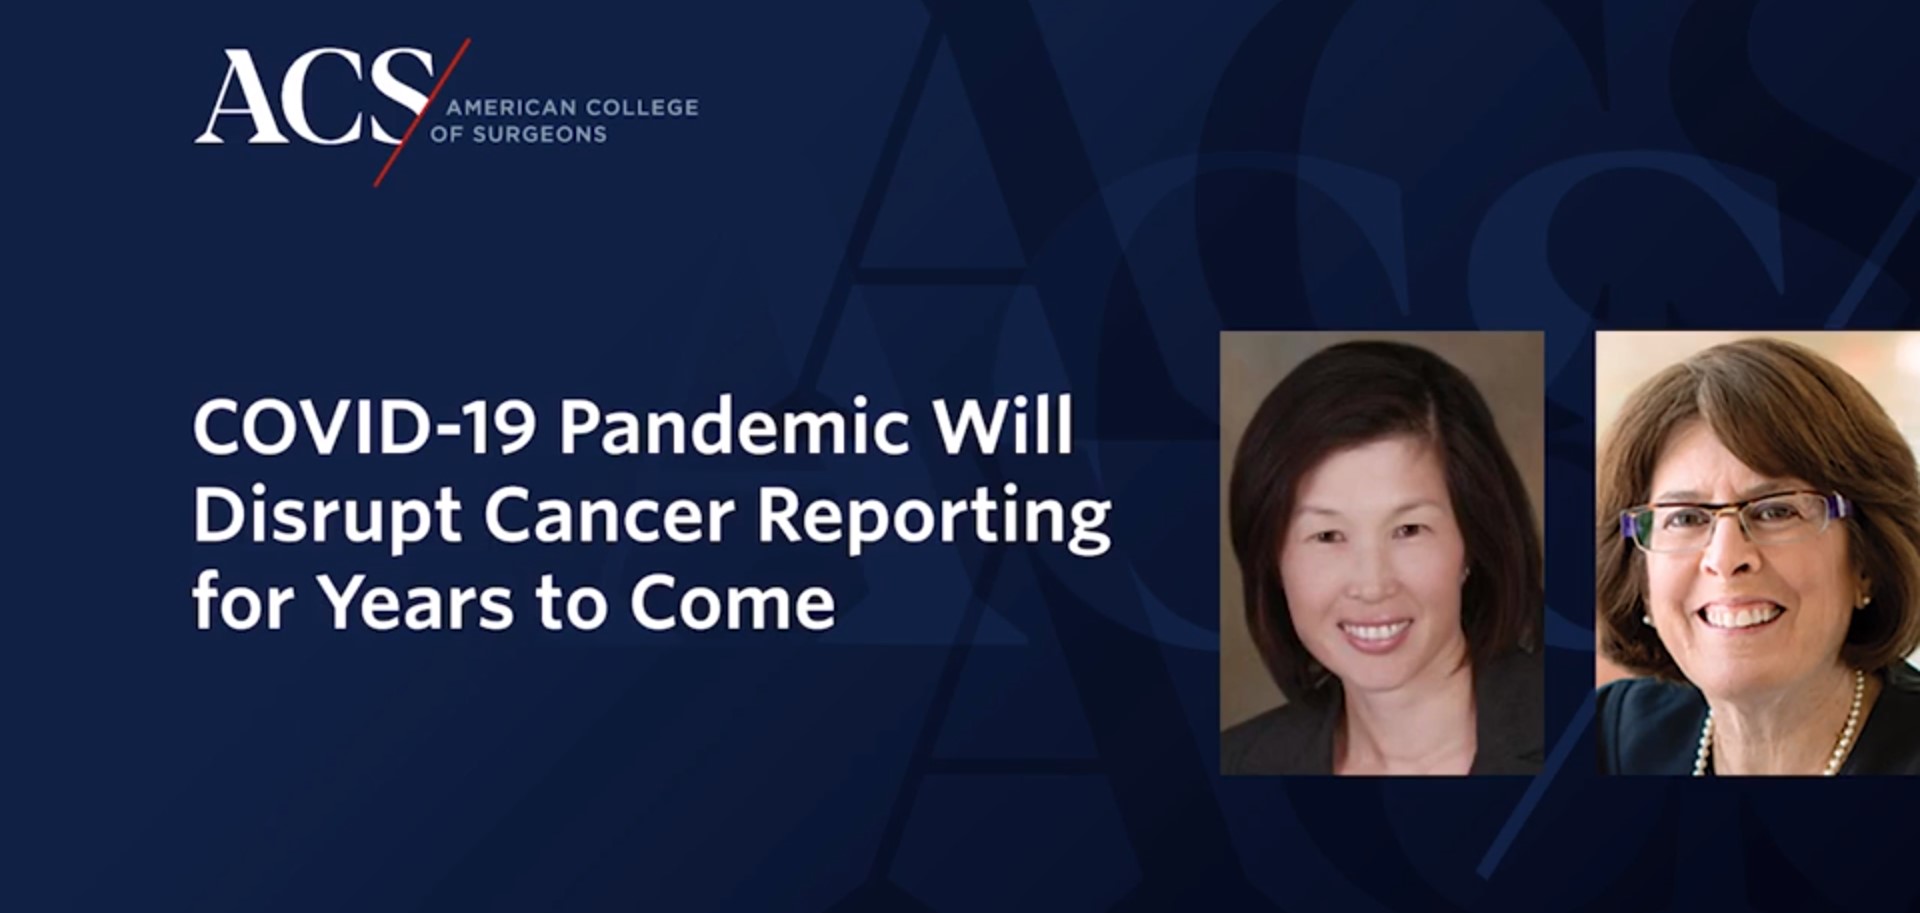 COVID-19 Pandemic Will Disrupt Cancer Reporting for Years to Come